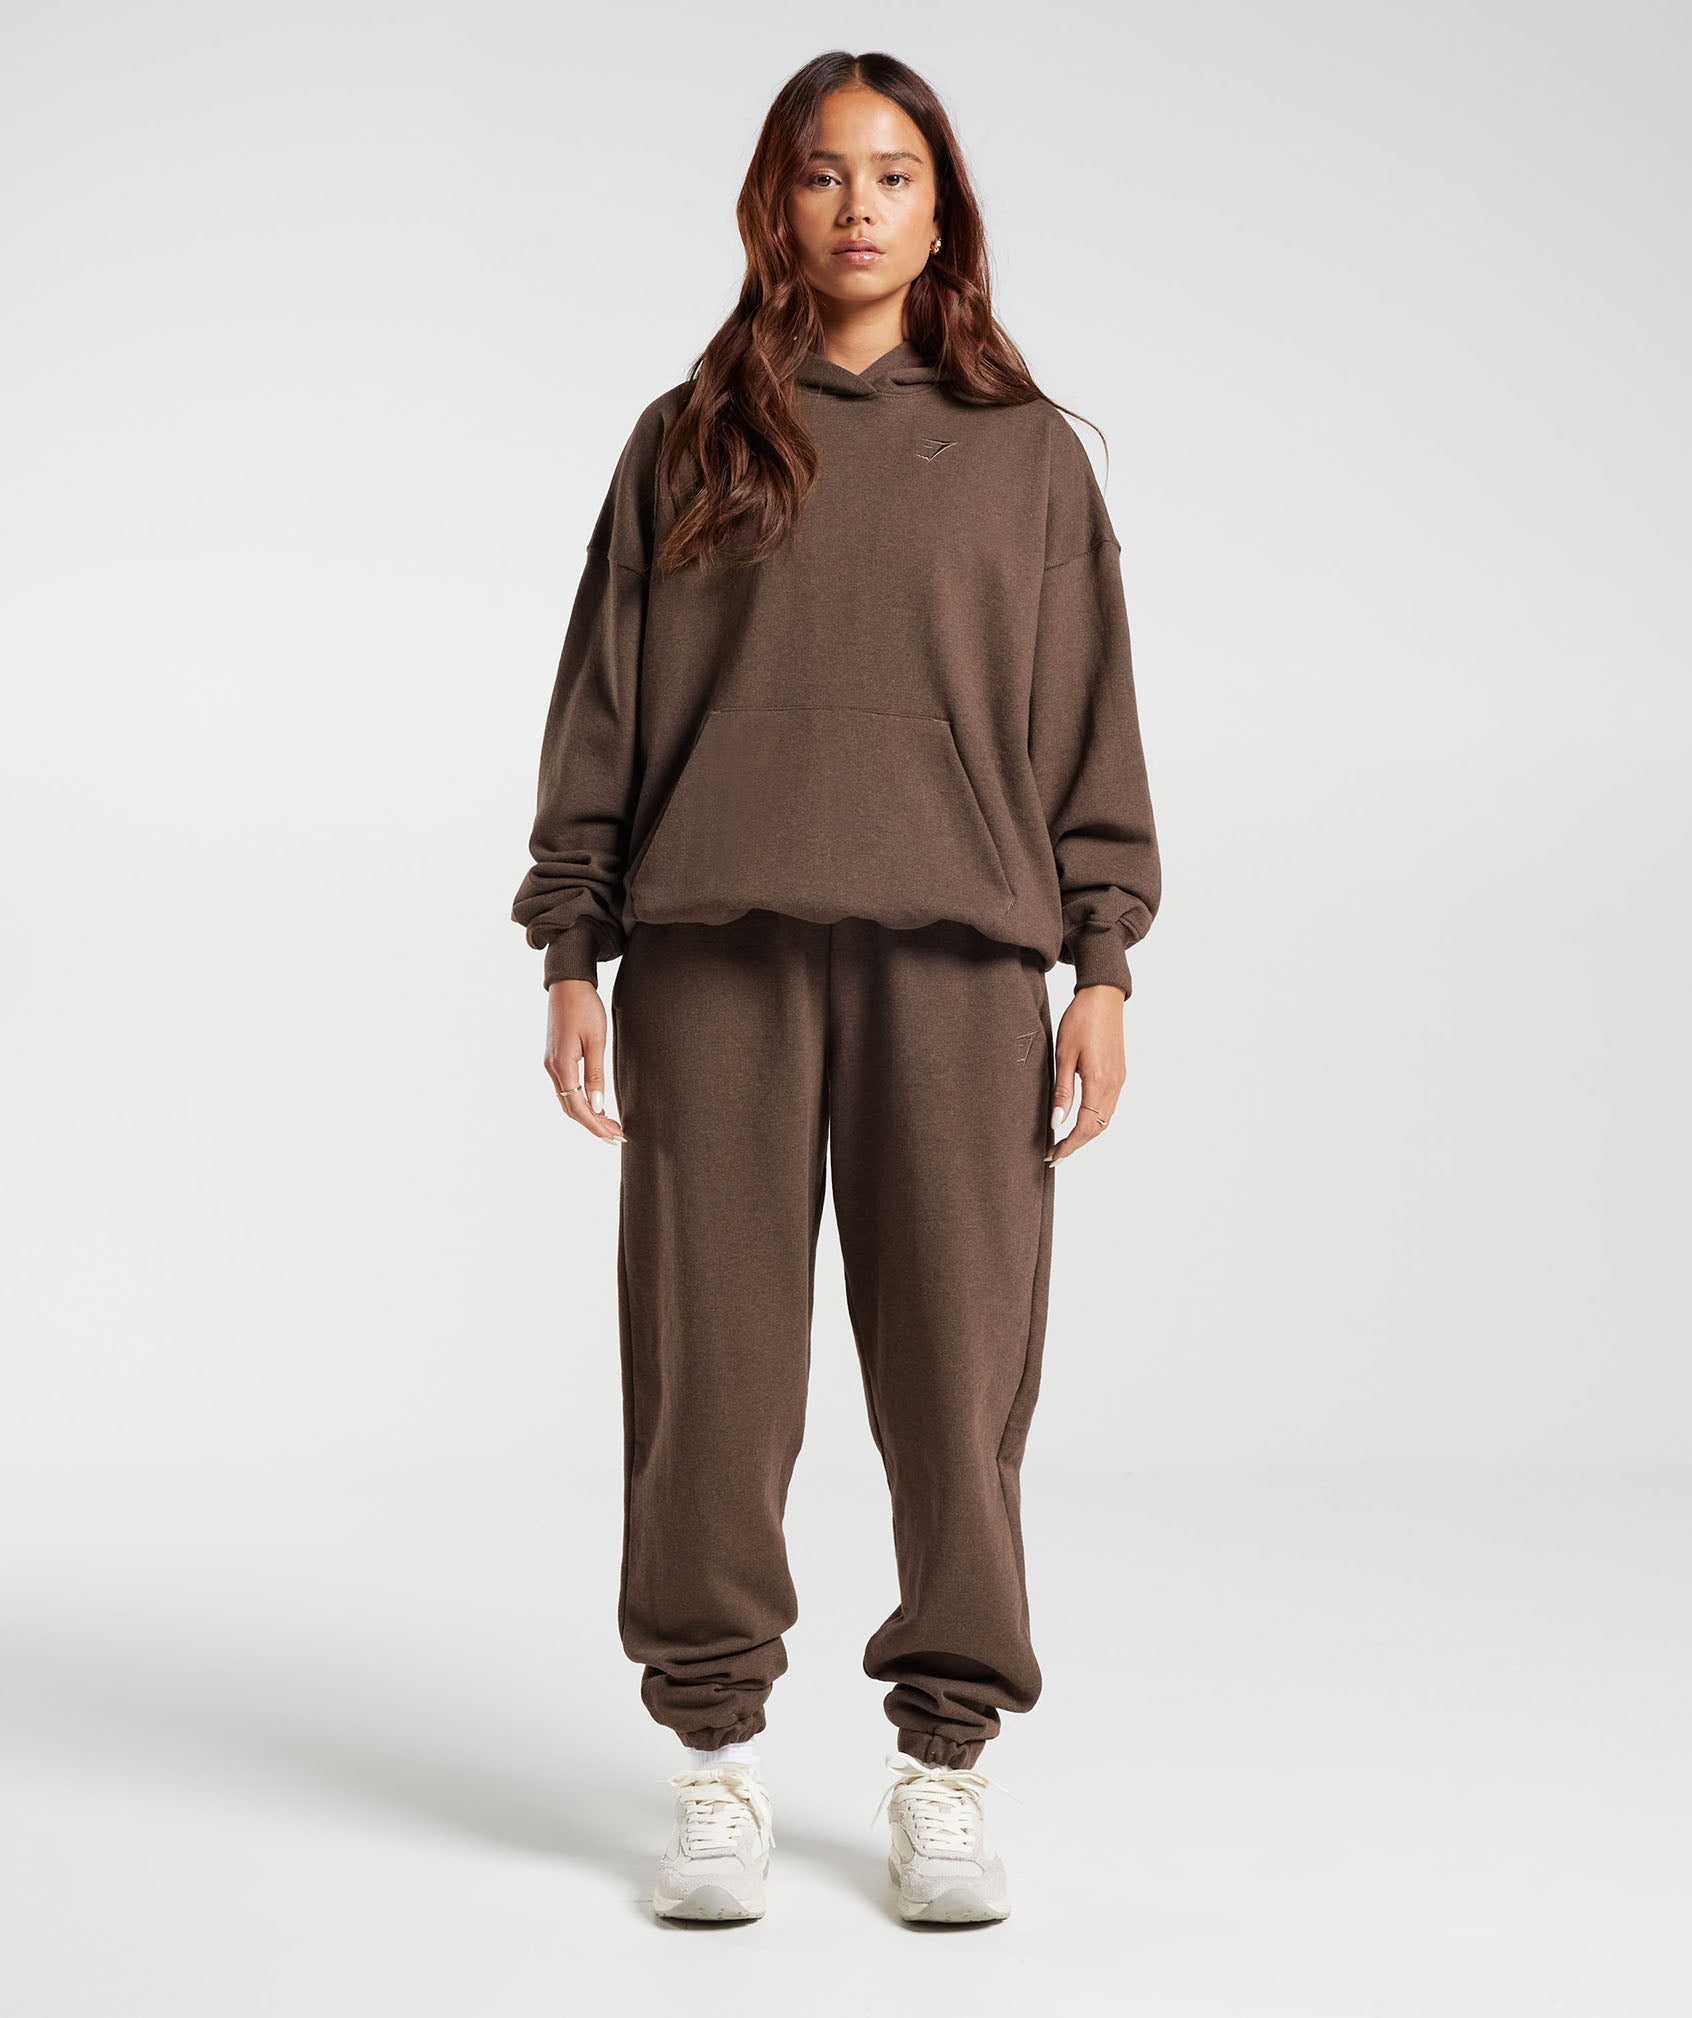 Rest Day Sweats Hoodie in Cozy Brown Marl - view 8